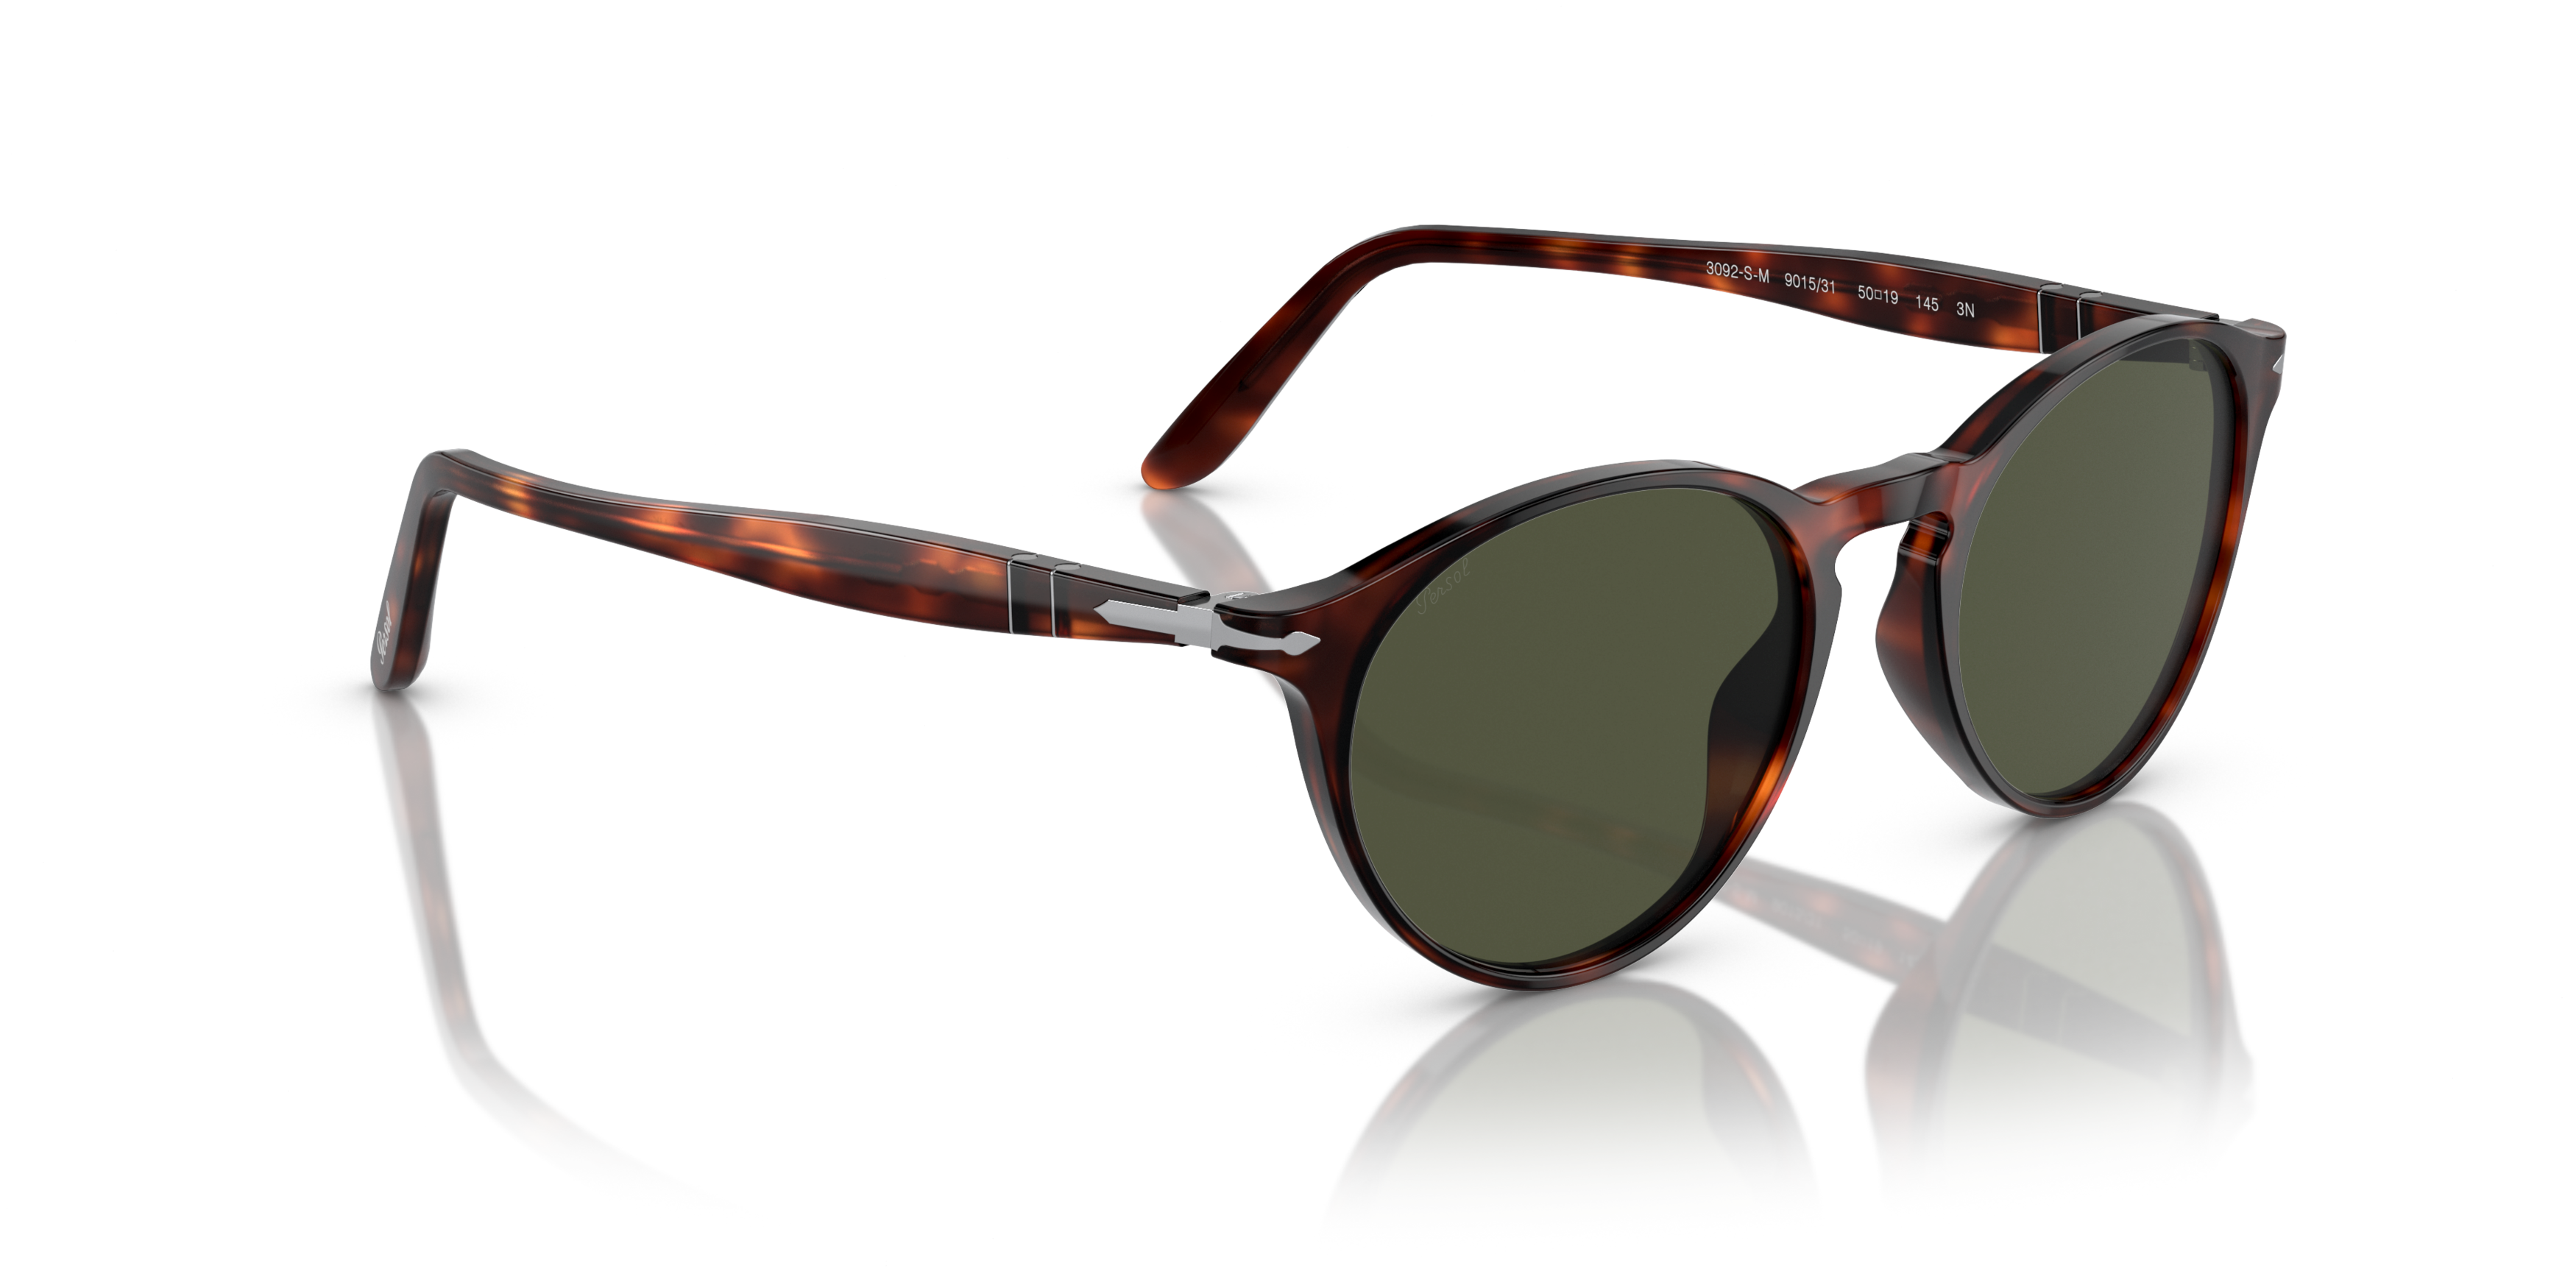 [products.image.angle_right01] Persol PO 3092S Sunglasses